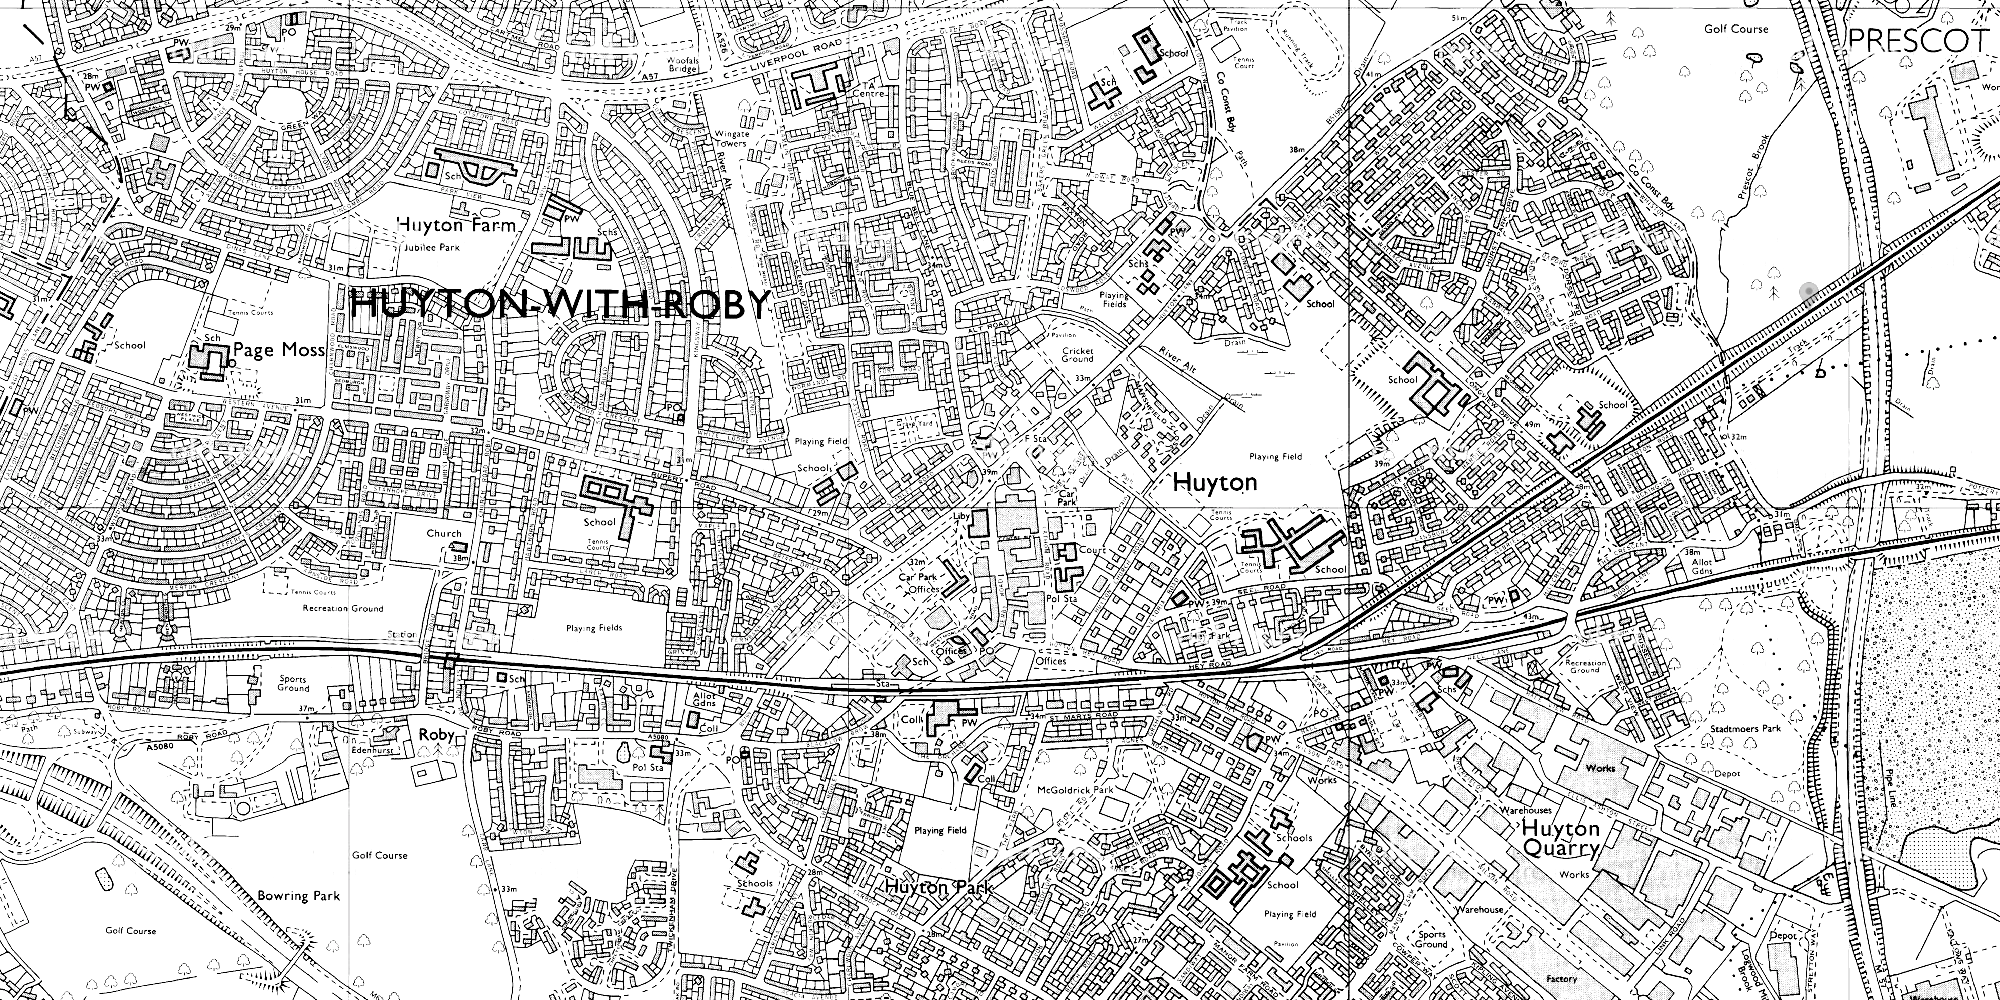 OS map of Huyton, 1990-1, (1:10,000)